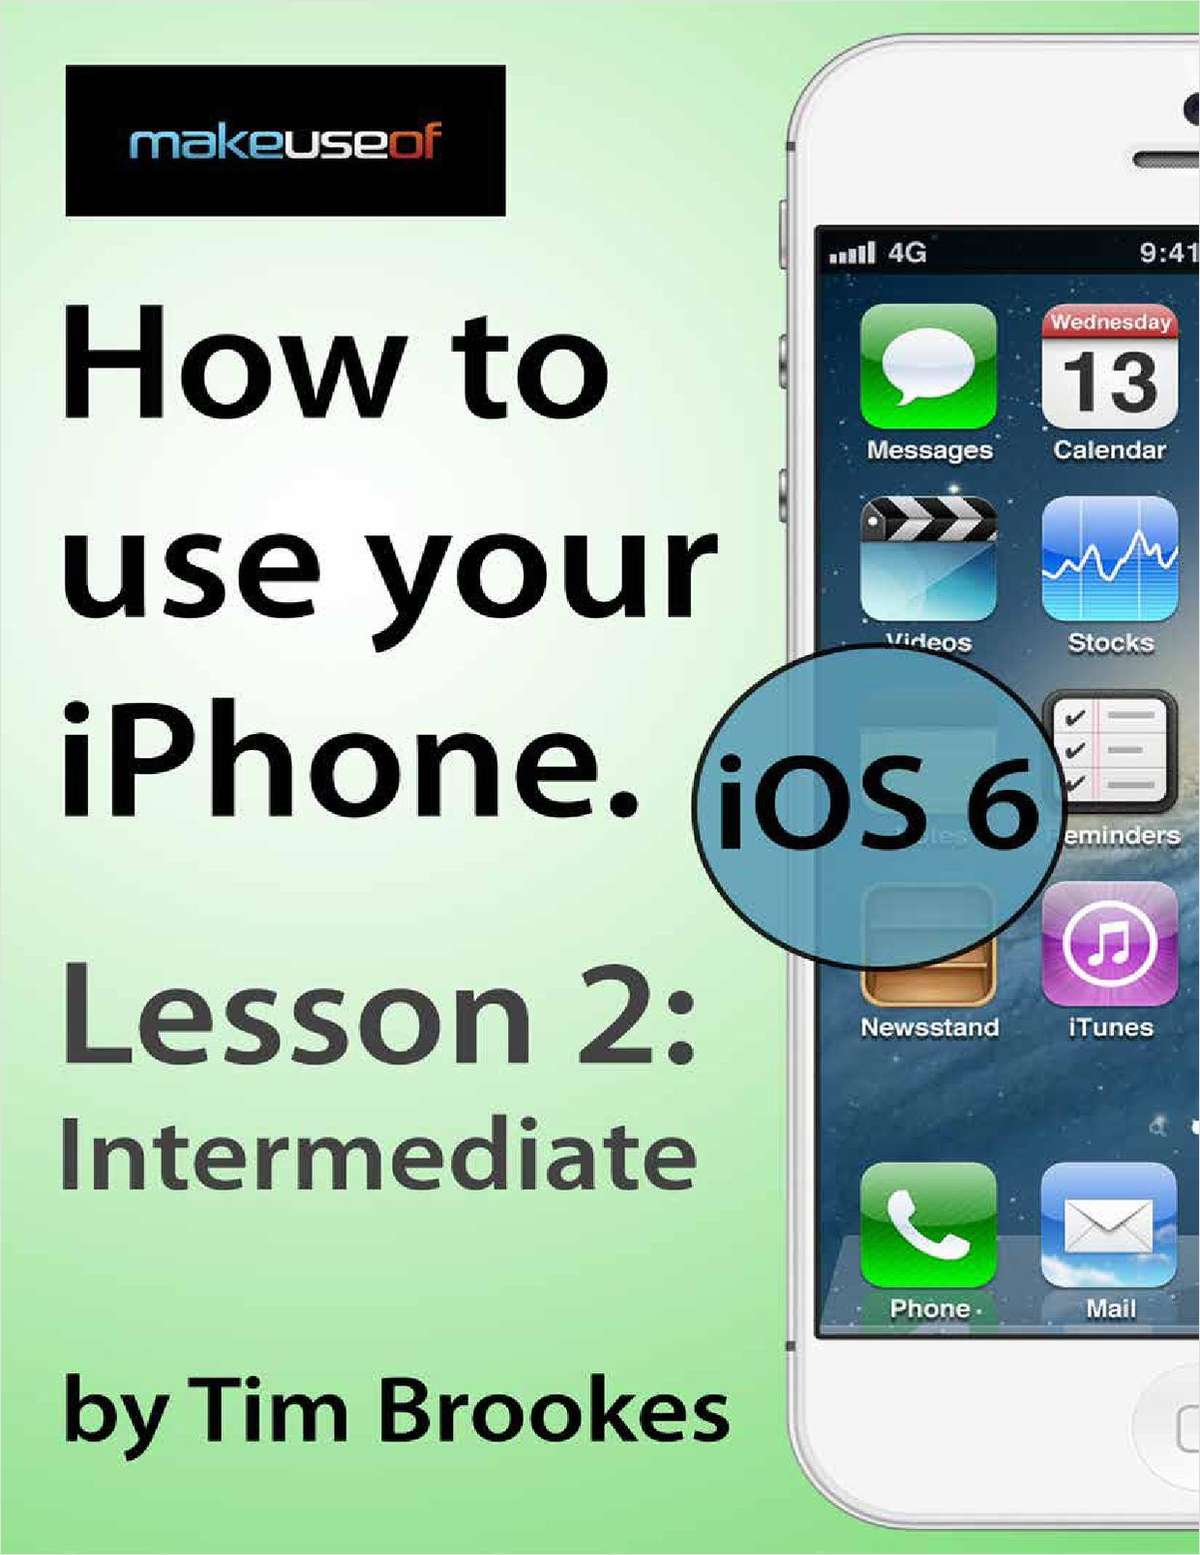 How To Use Your iPhone iOS6: Lesson 2 Intermediate